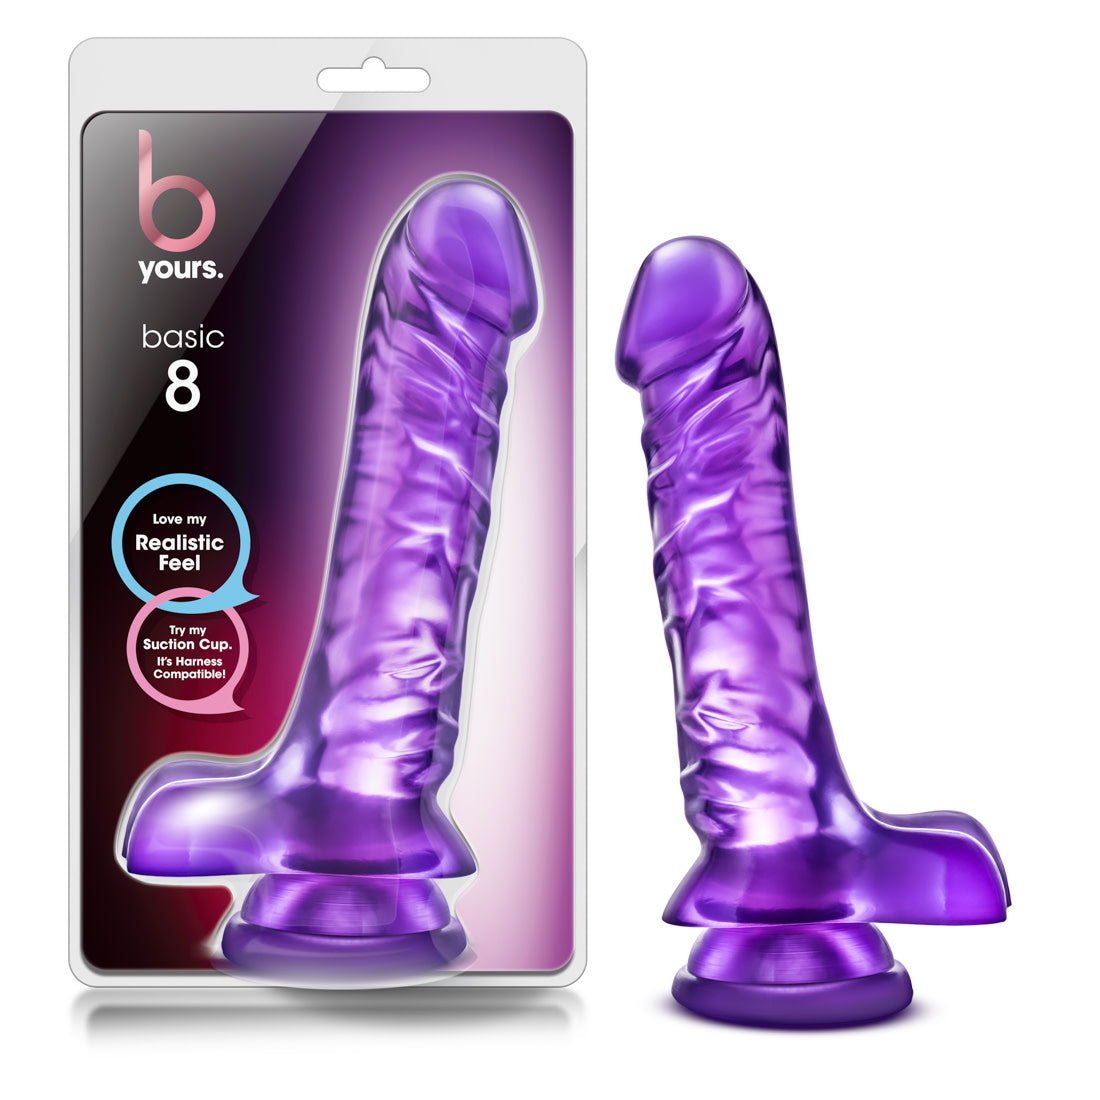 B Yours Basic 8 Realistic Purple 9-Inch Long Dildo With Balls & Suction Cup Base